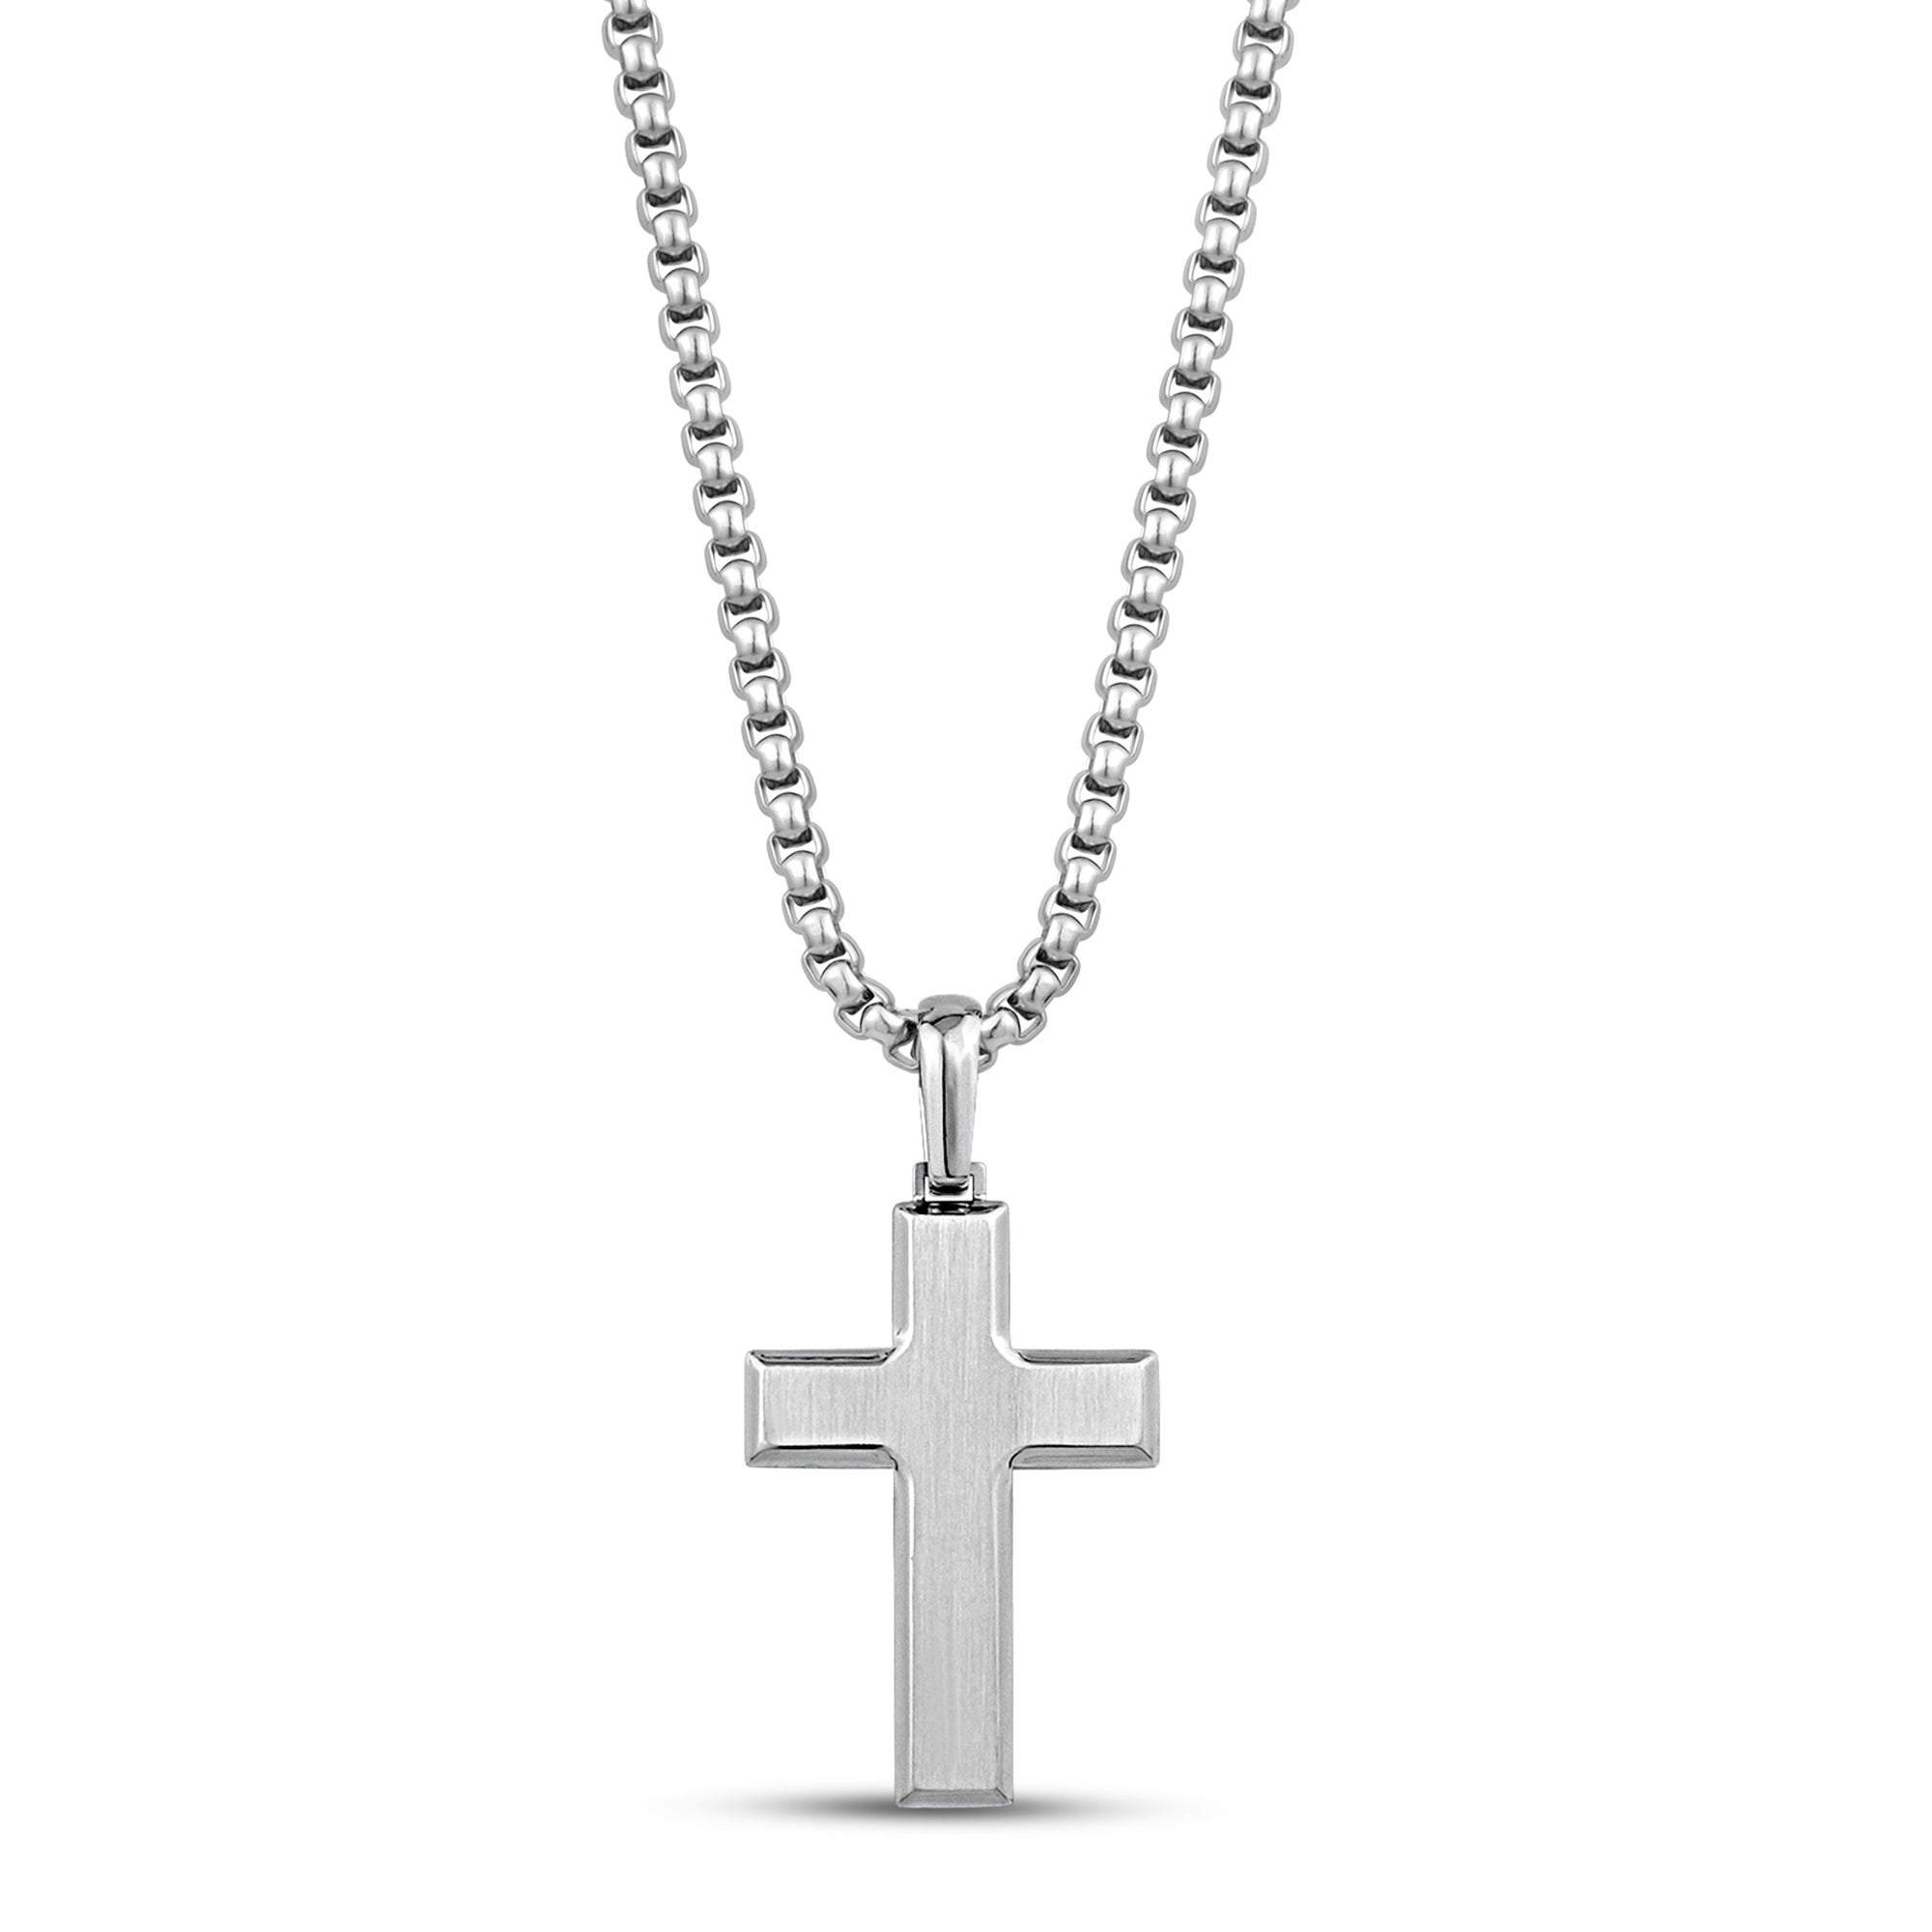 Buy Black Cross Necklace, Stainless Steel Religious Jewelry, Mens Cross  Pendant Online in India - Etsy